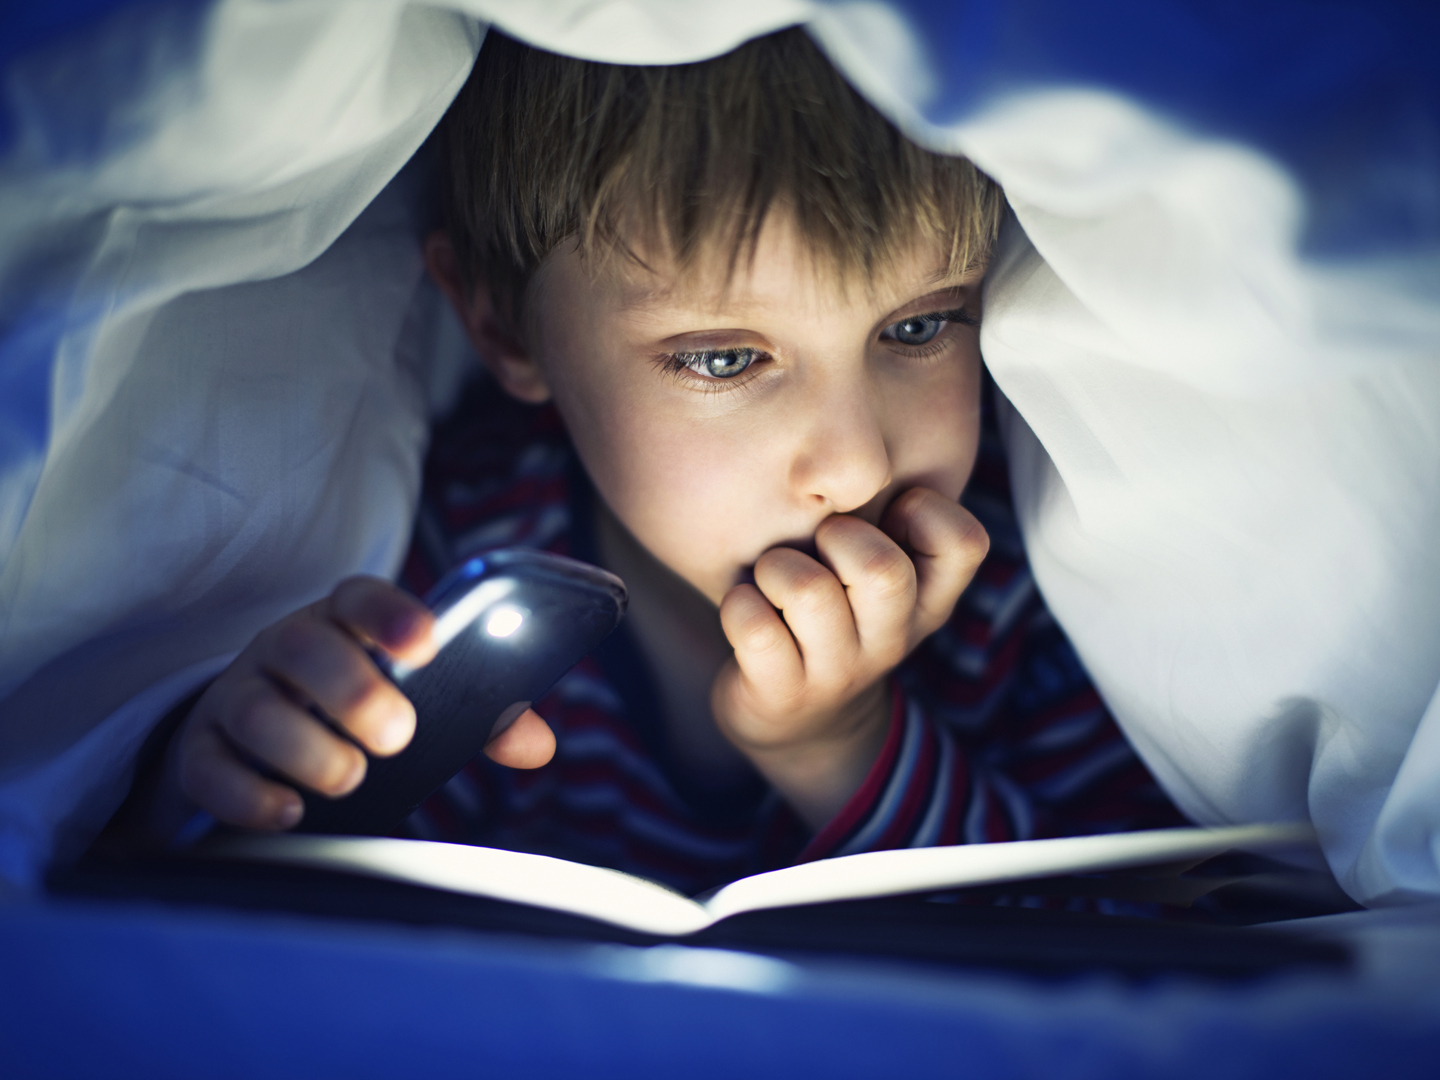 Little boy aged 5 is secretly reading book under sheets using mobile light. The book is very interesting and the boy is quite lost in it.